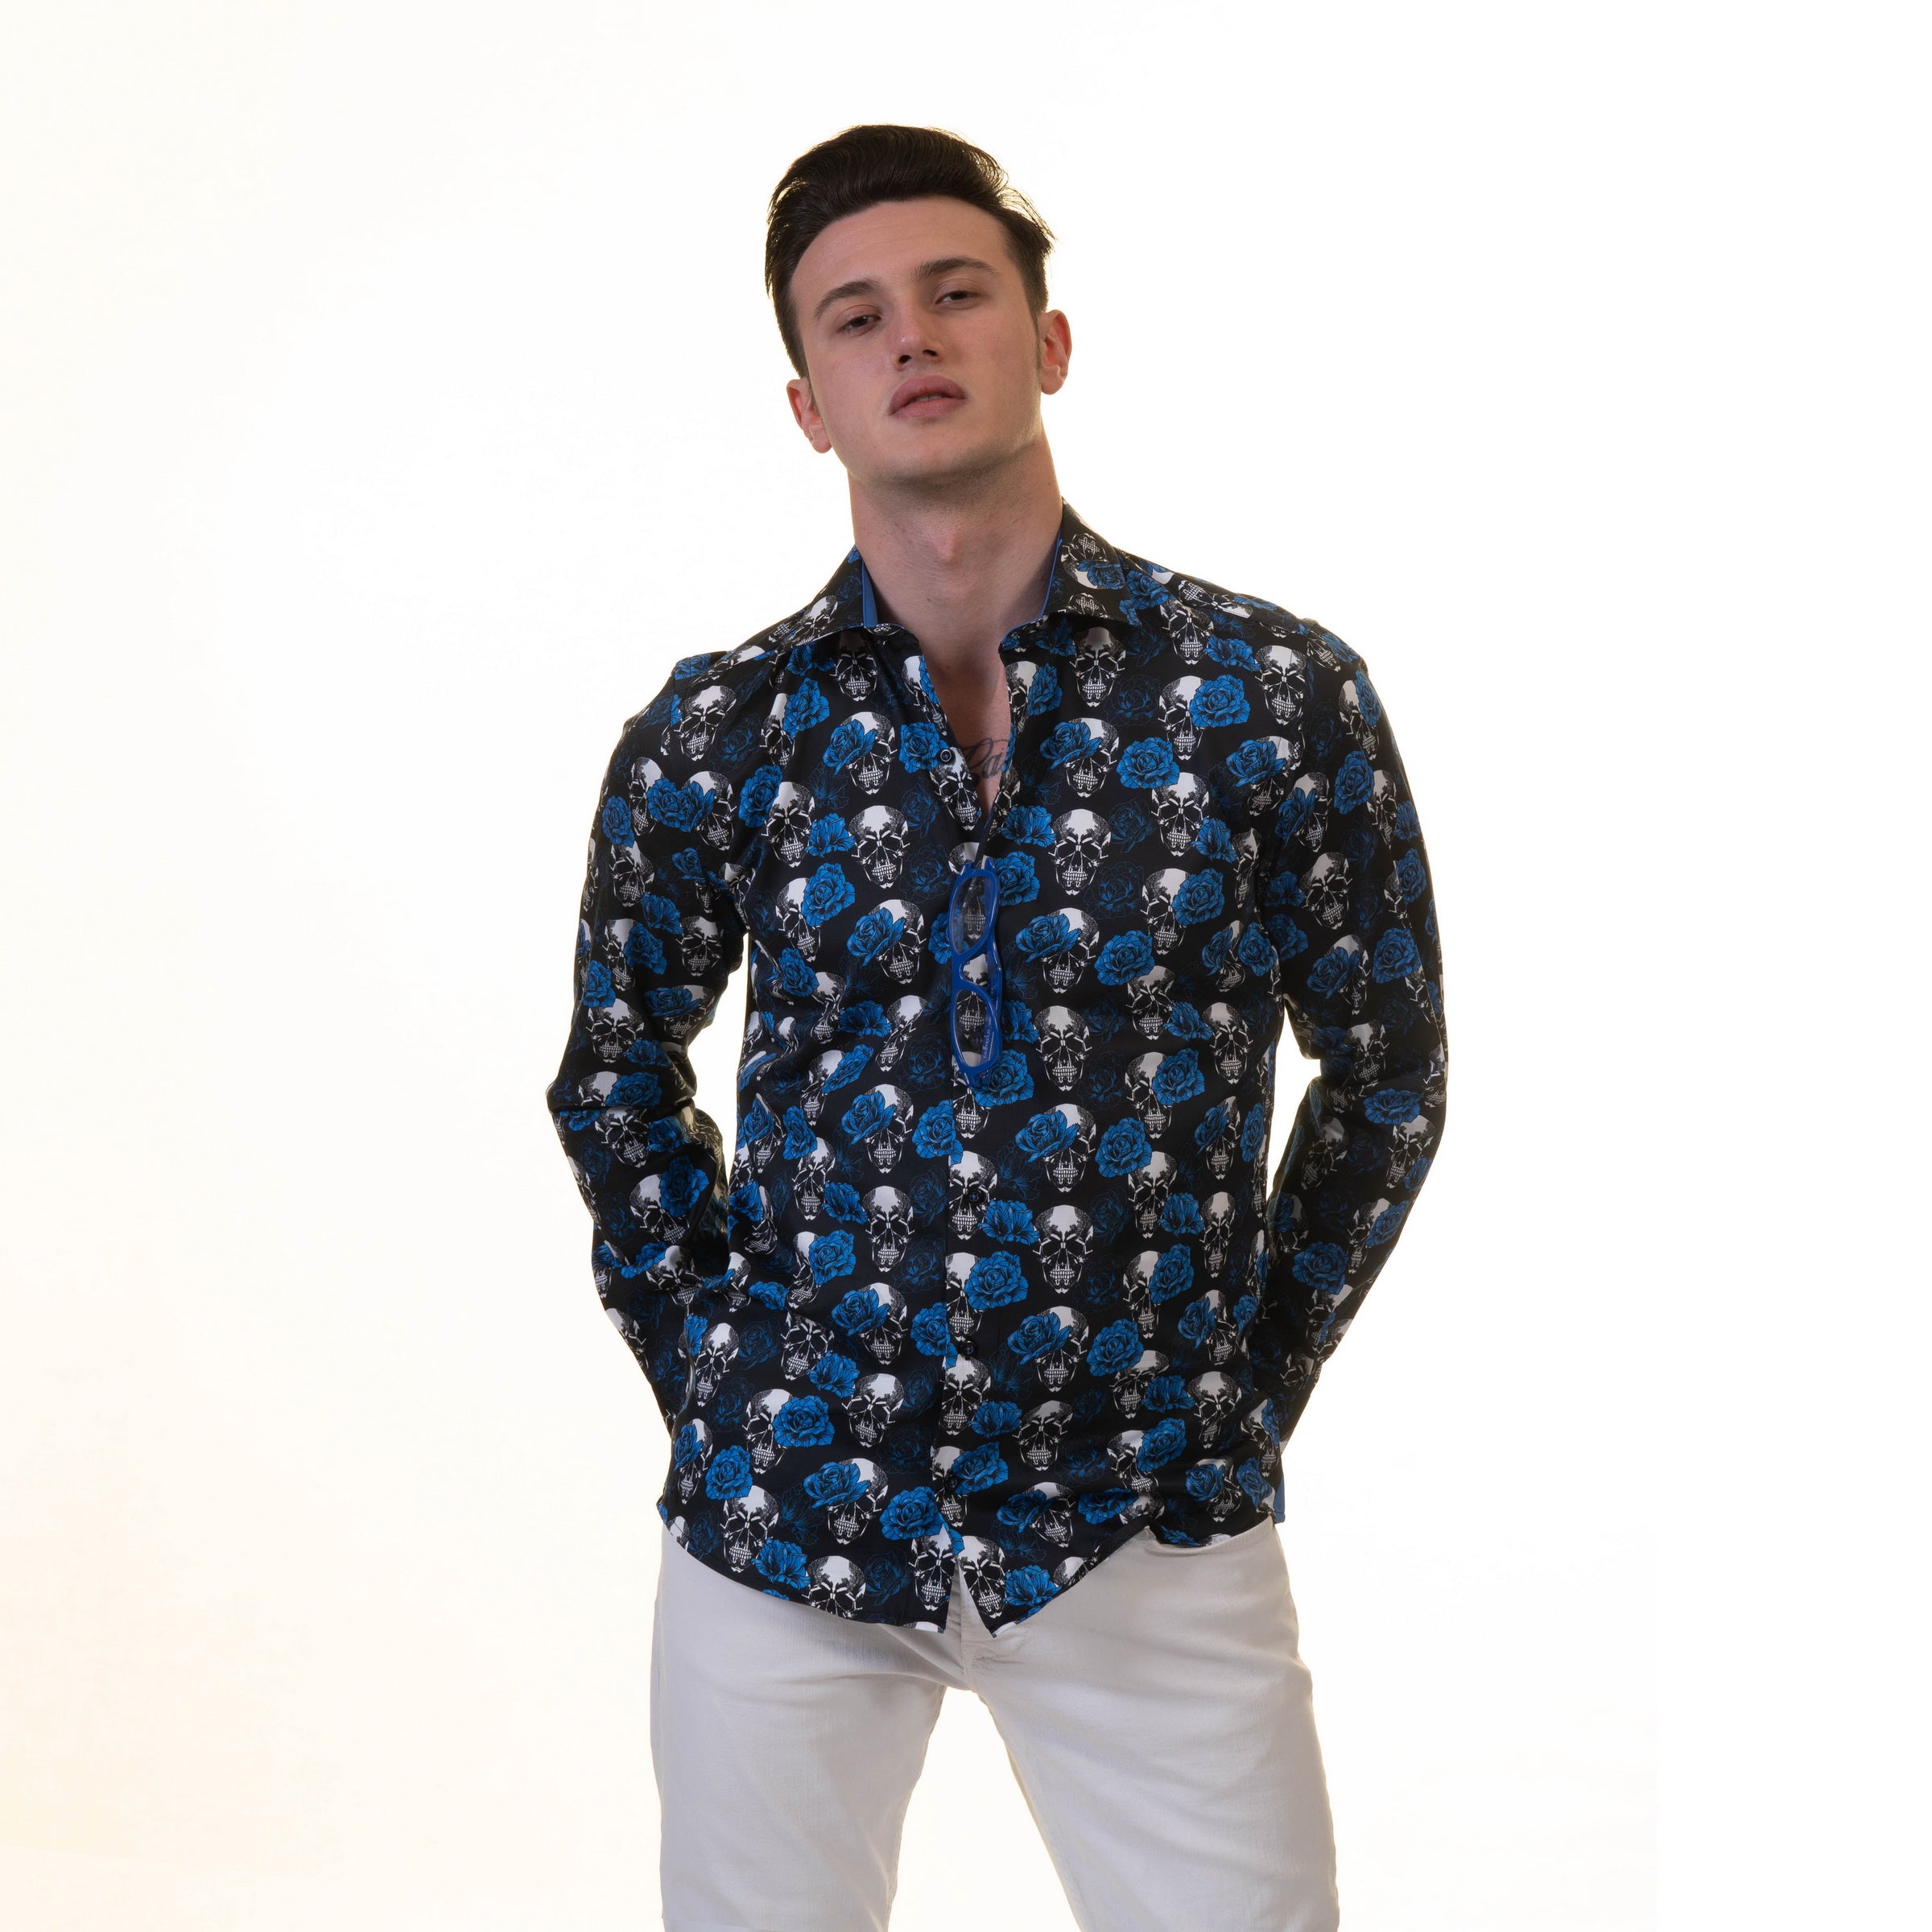 Black White Blue Skulls Mens Slim Fit Designer French Cuff Shirt - tailored Cotton Shirts for Work and Casual Wear